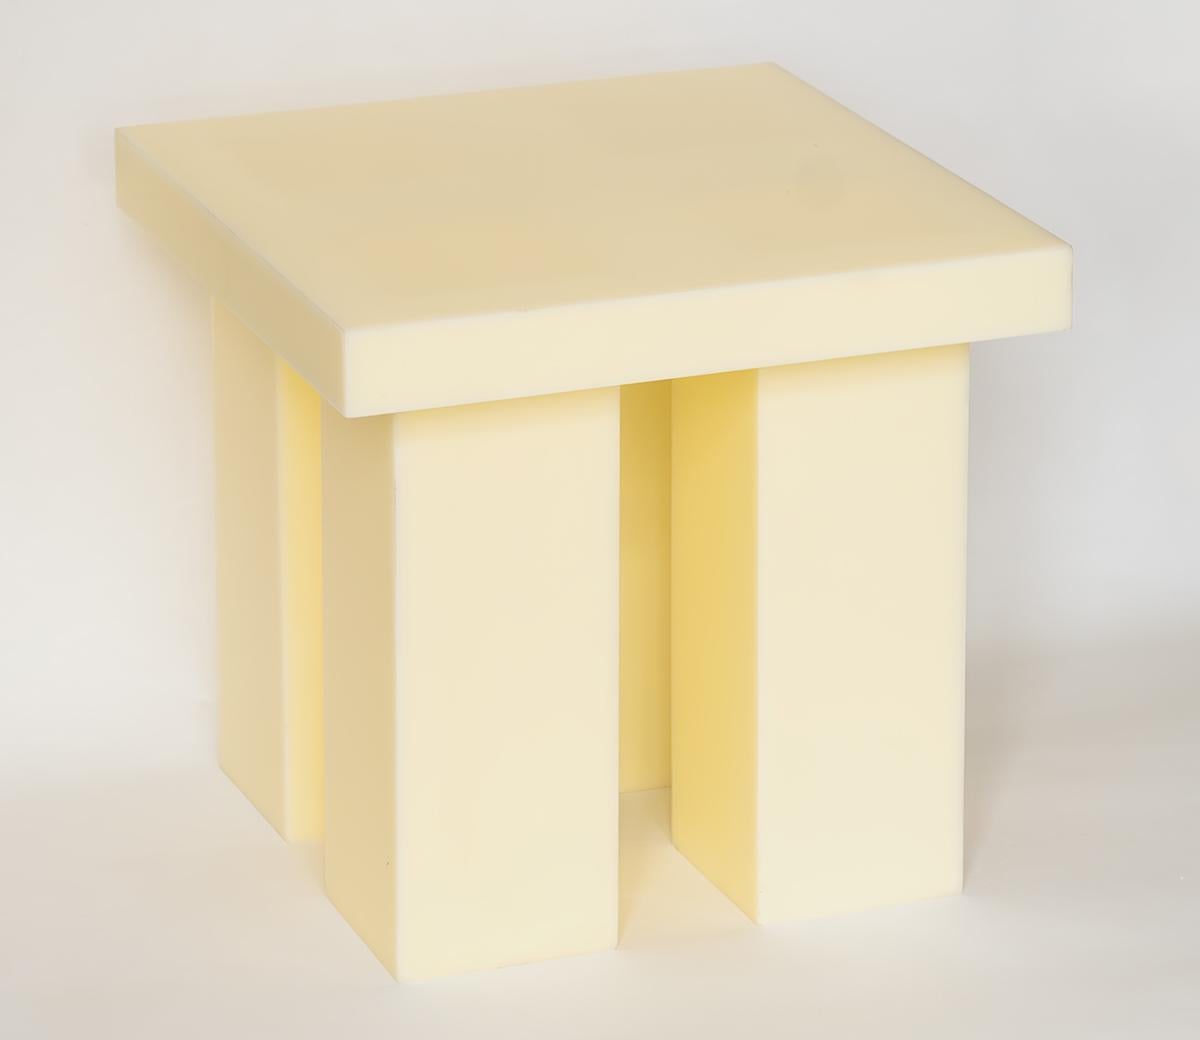 The Miter is an elemental side table that evokes mass and stability. It's available in yellow resin, raw aluminum, or burl wood, with all three versions constructed by connecting sheet materials using a miter joint.

